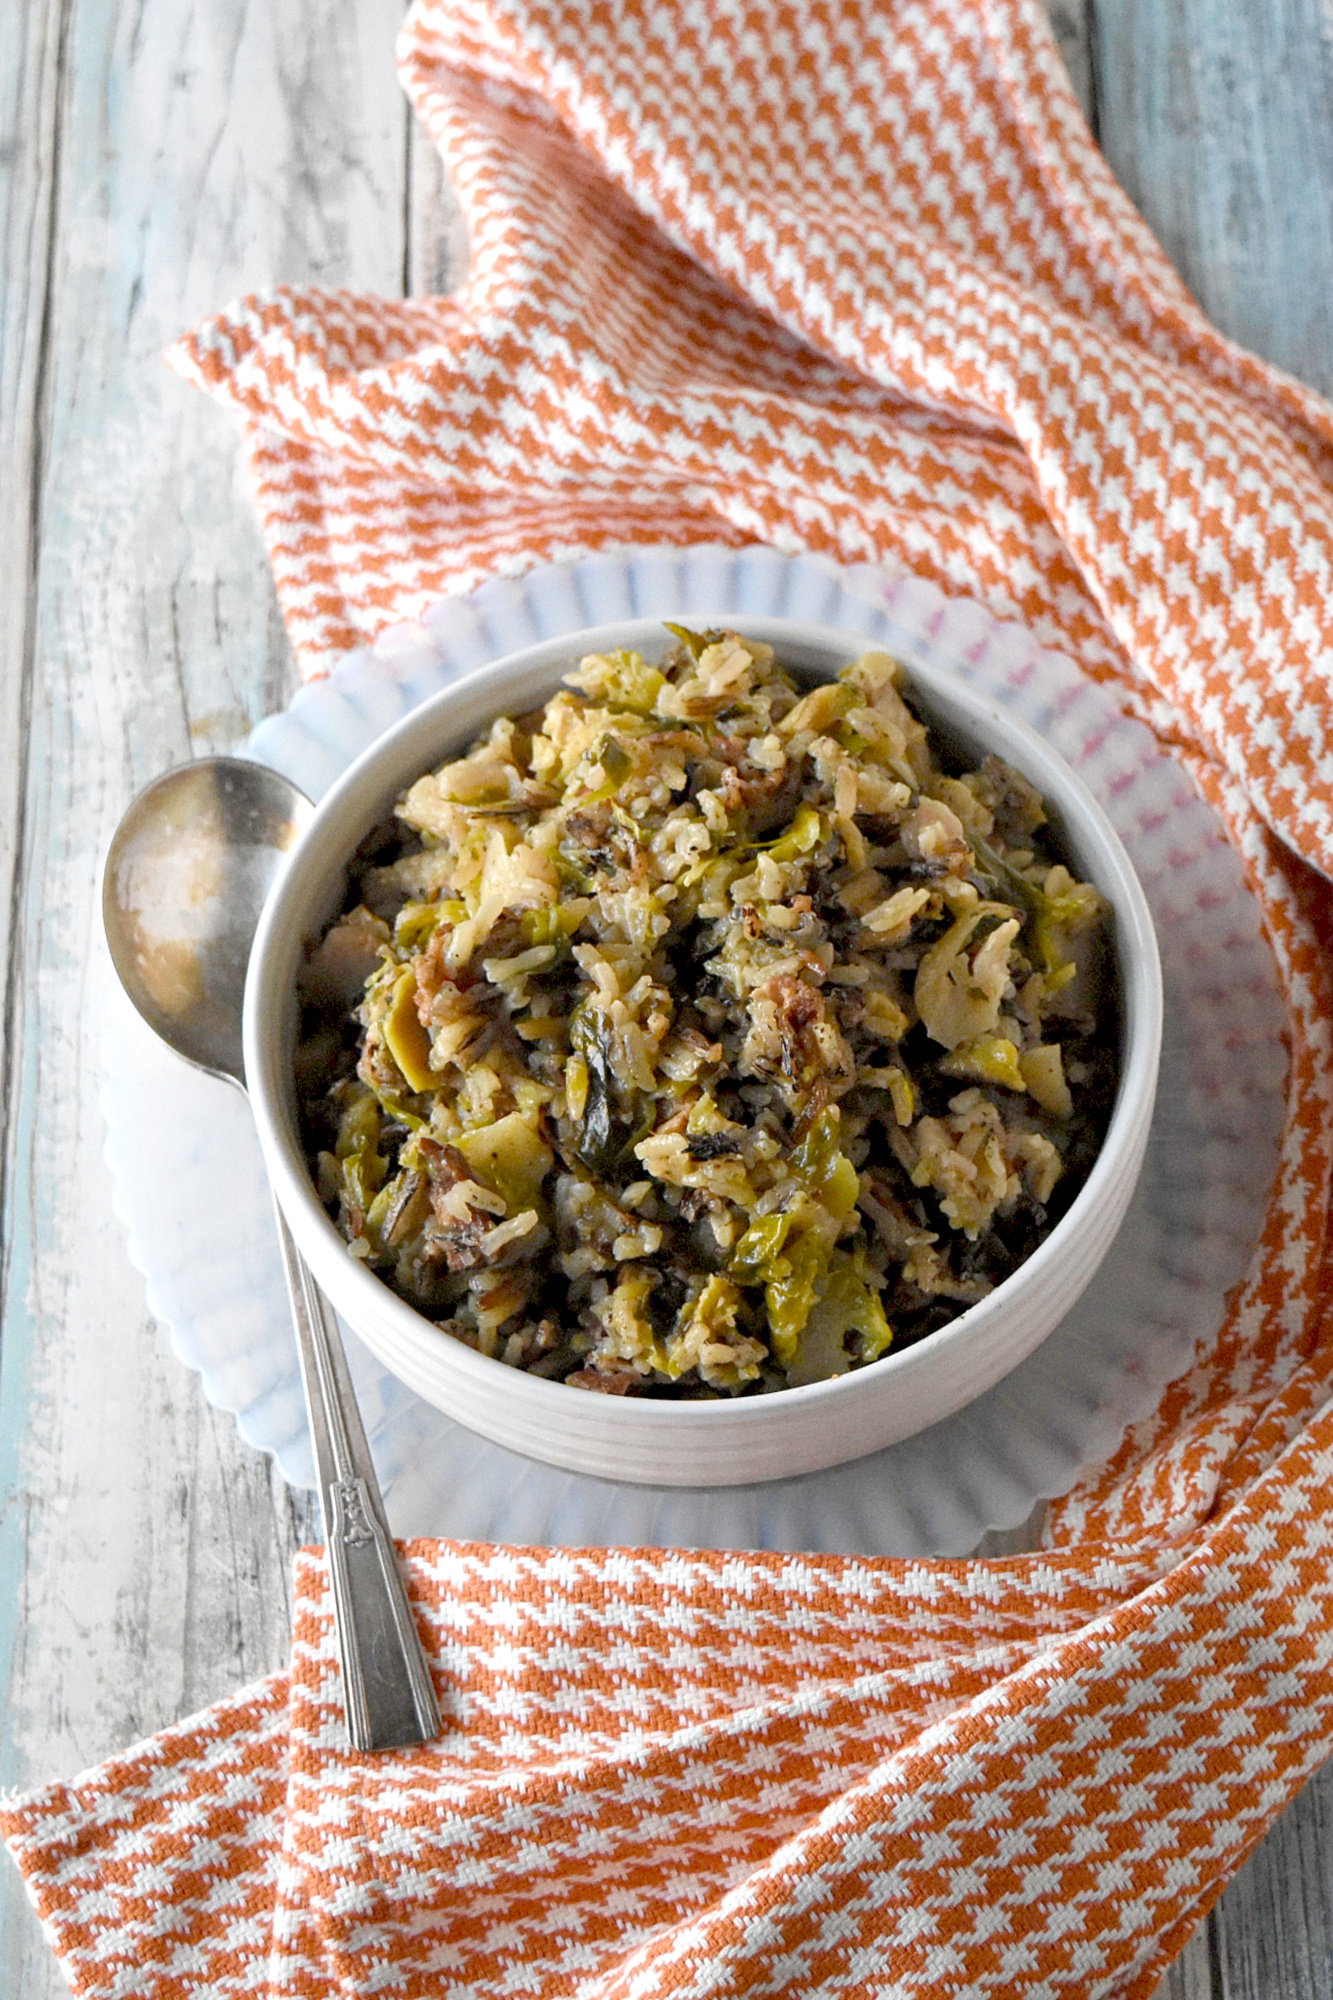 Wild Rice and Sprouts Pilaf is the perfect side dish to any holiday meal.  Any meal for that matter.  With long grain and wild rice simmered with Brussels sprouts and thick cut bacon, it’s a side dish you’re family will love! #HolidaySideDishes